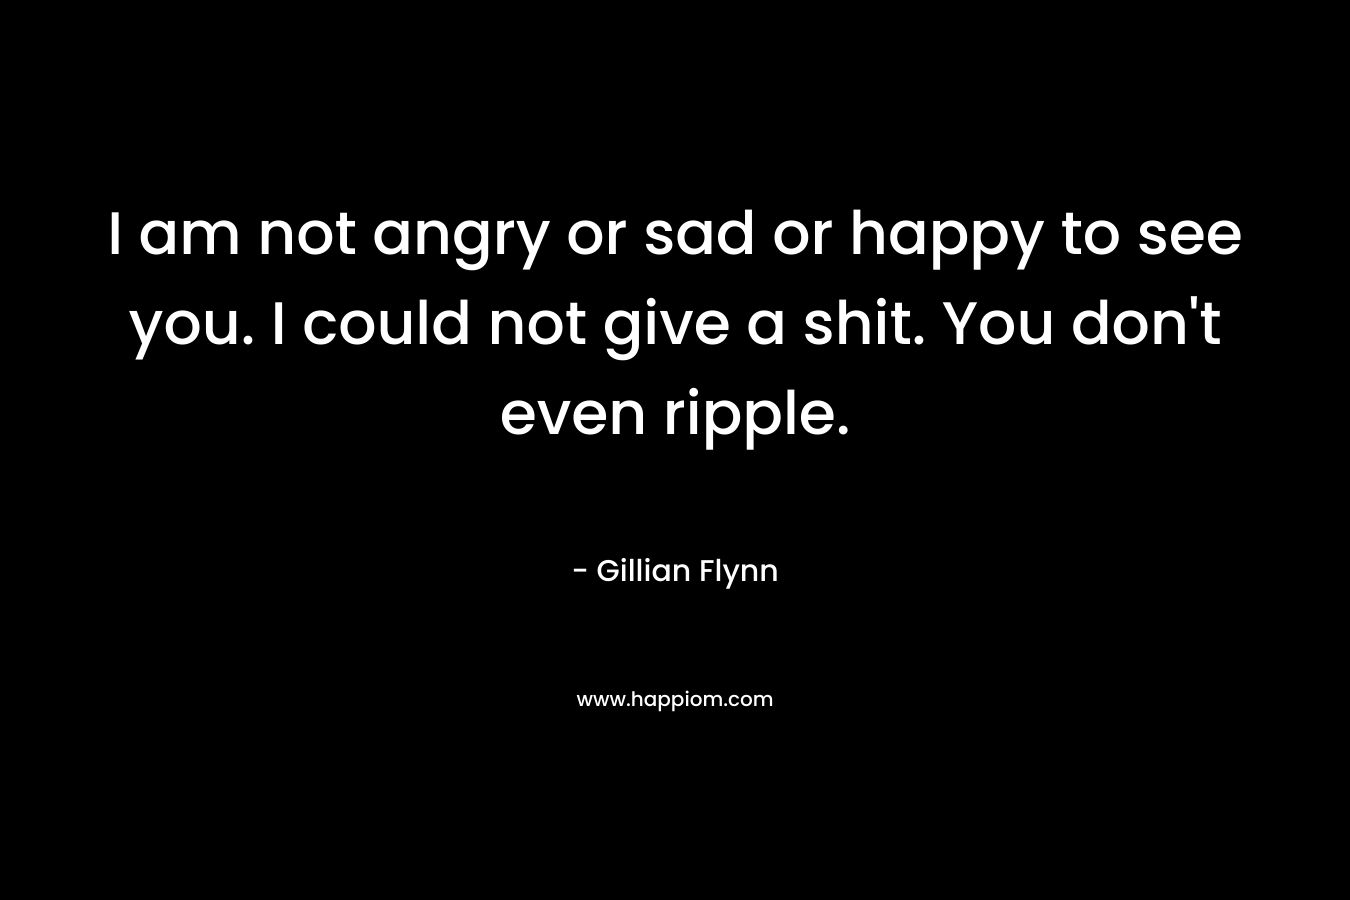 I am not angry or sad or happy to see you. I could not give a shit. You don't even ripple.